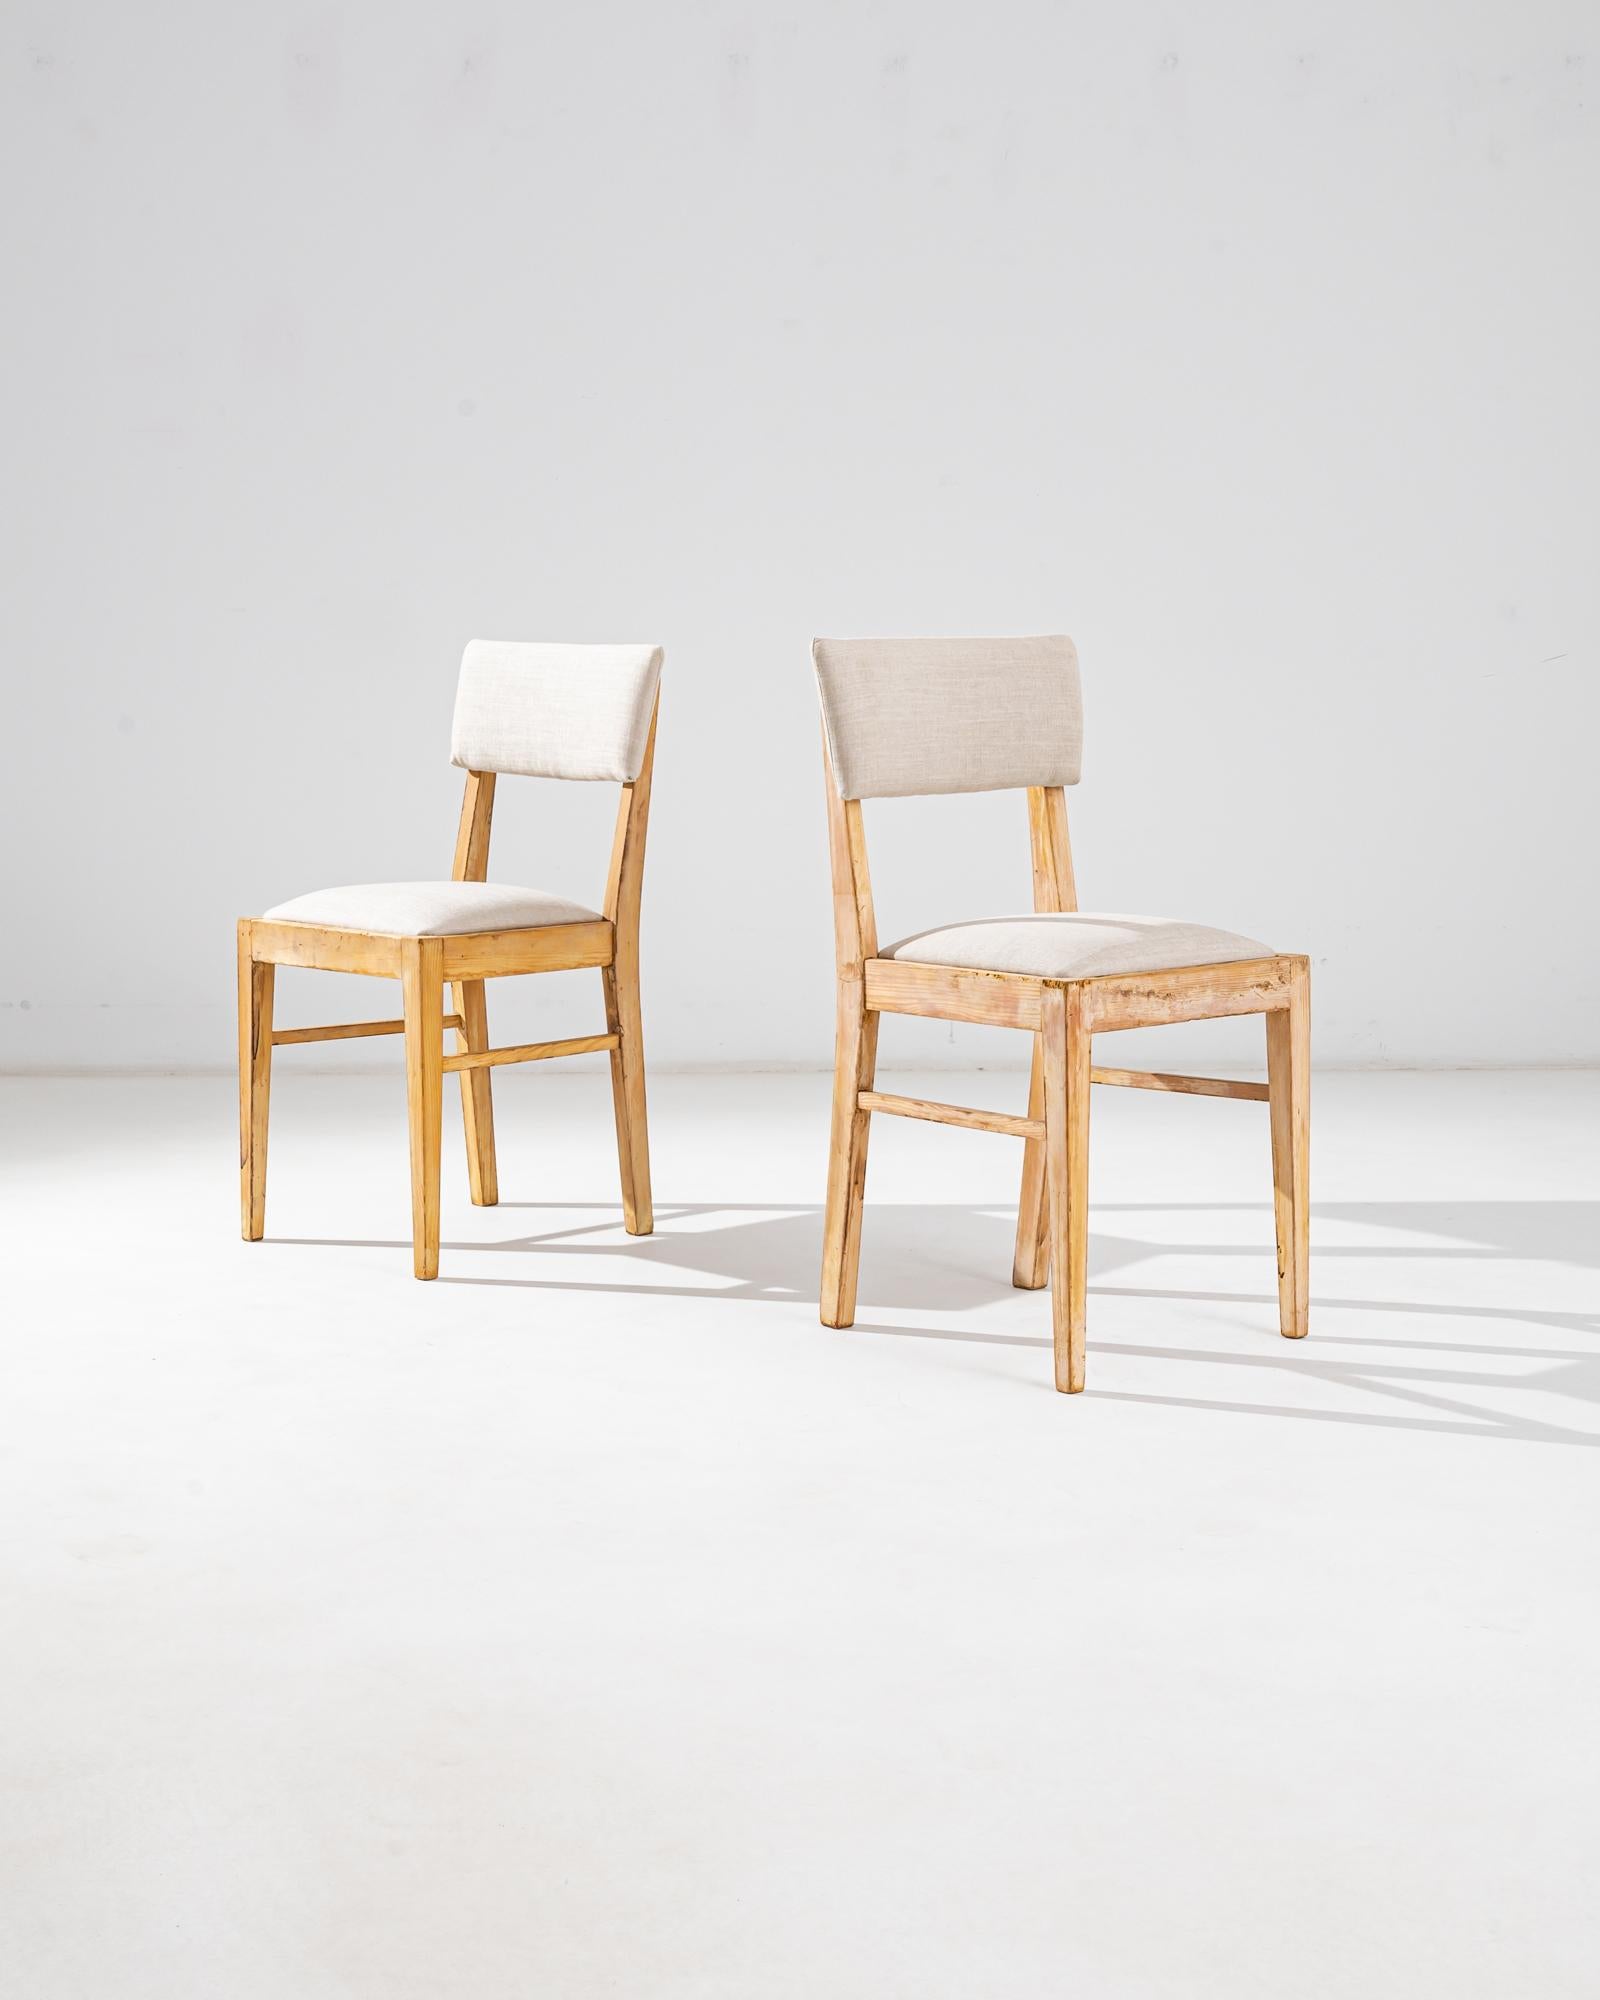 Uncover the allure of vintage charm with this exquisite pair of 1900s Central European Wooden Chairs. Each chair stands as a relic of a time when craftsmanship was an art, featuring sturdy wooden frames that showcase the natural beauty of the wood